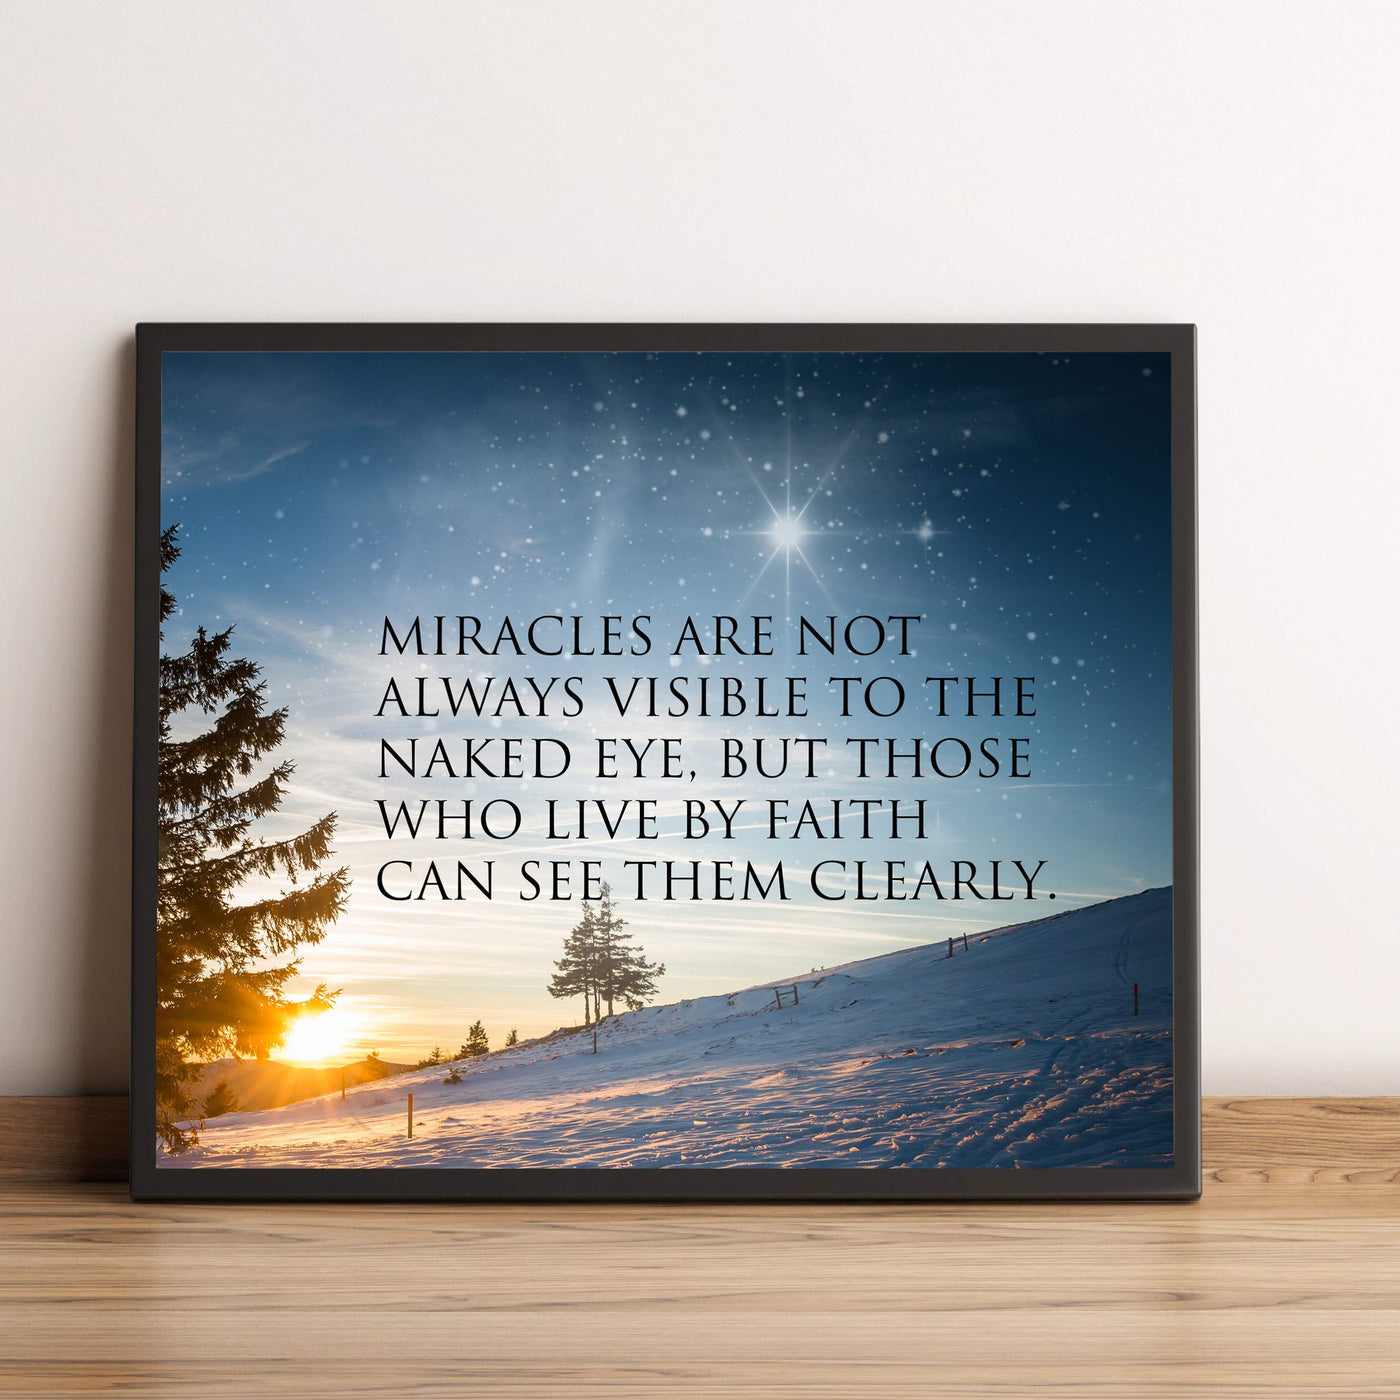 Miracles Not Always Visible to the Naked Eye Inspirational Wall Art Quotes -10 x 8" Starry Night Sunset Print-Ready to Frame. Modern Typographic Home-Office-School-Dorm Decor. Great Gift of Faith!